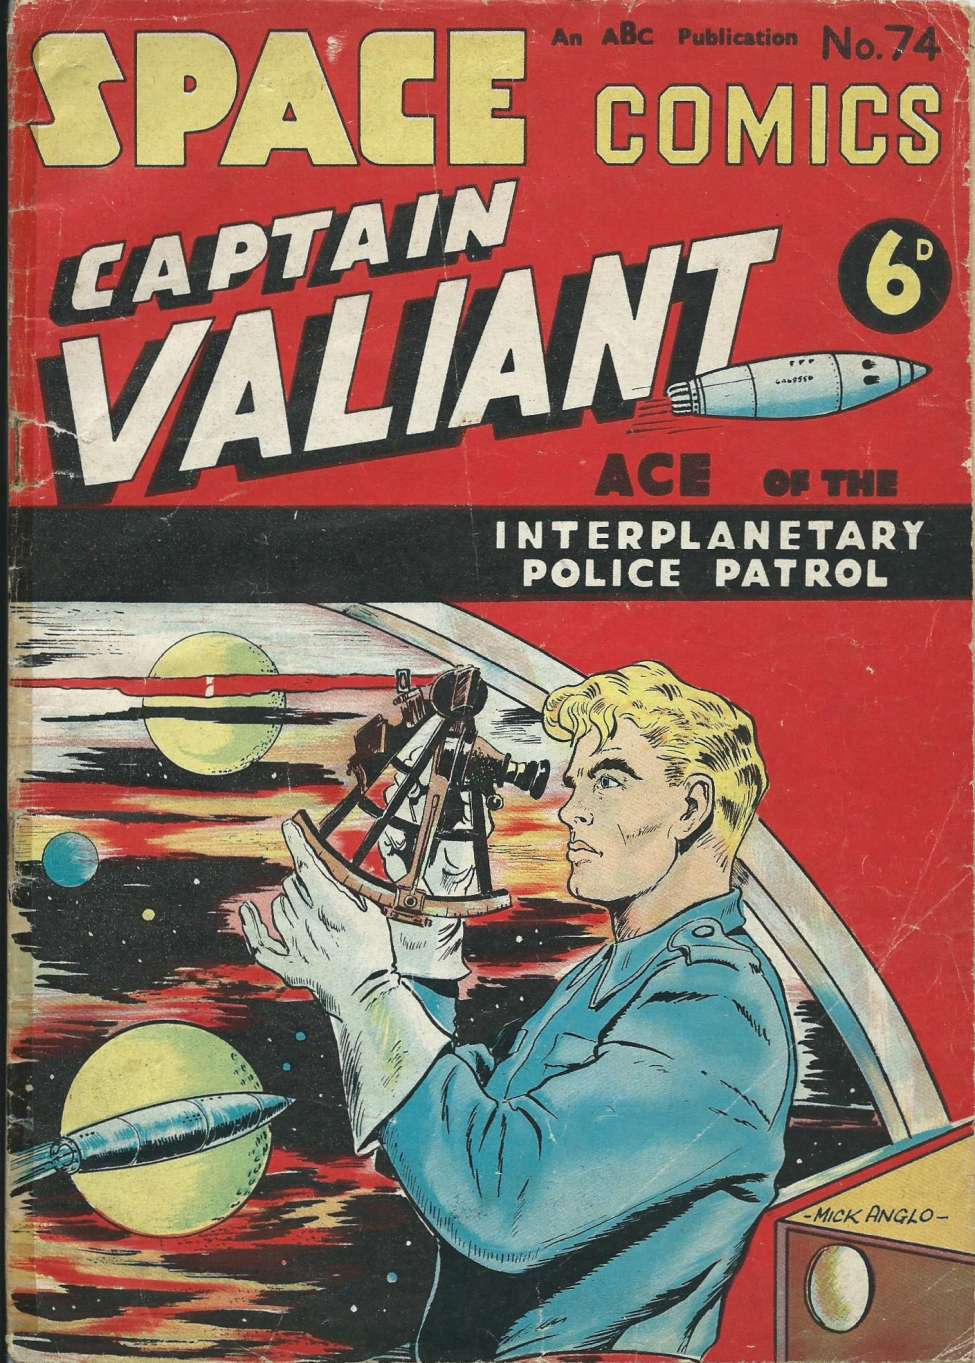 Comic Book Cover For Space Comics (Captain Valiant) 74